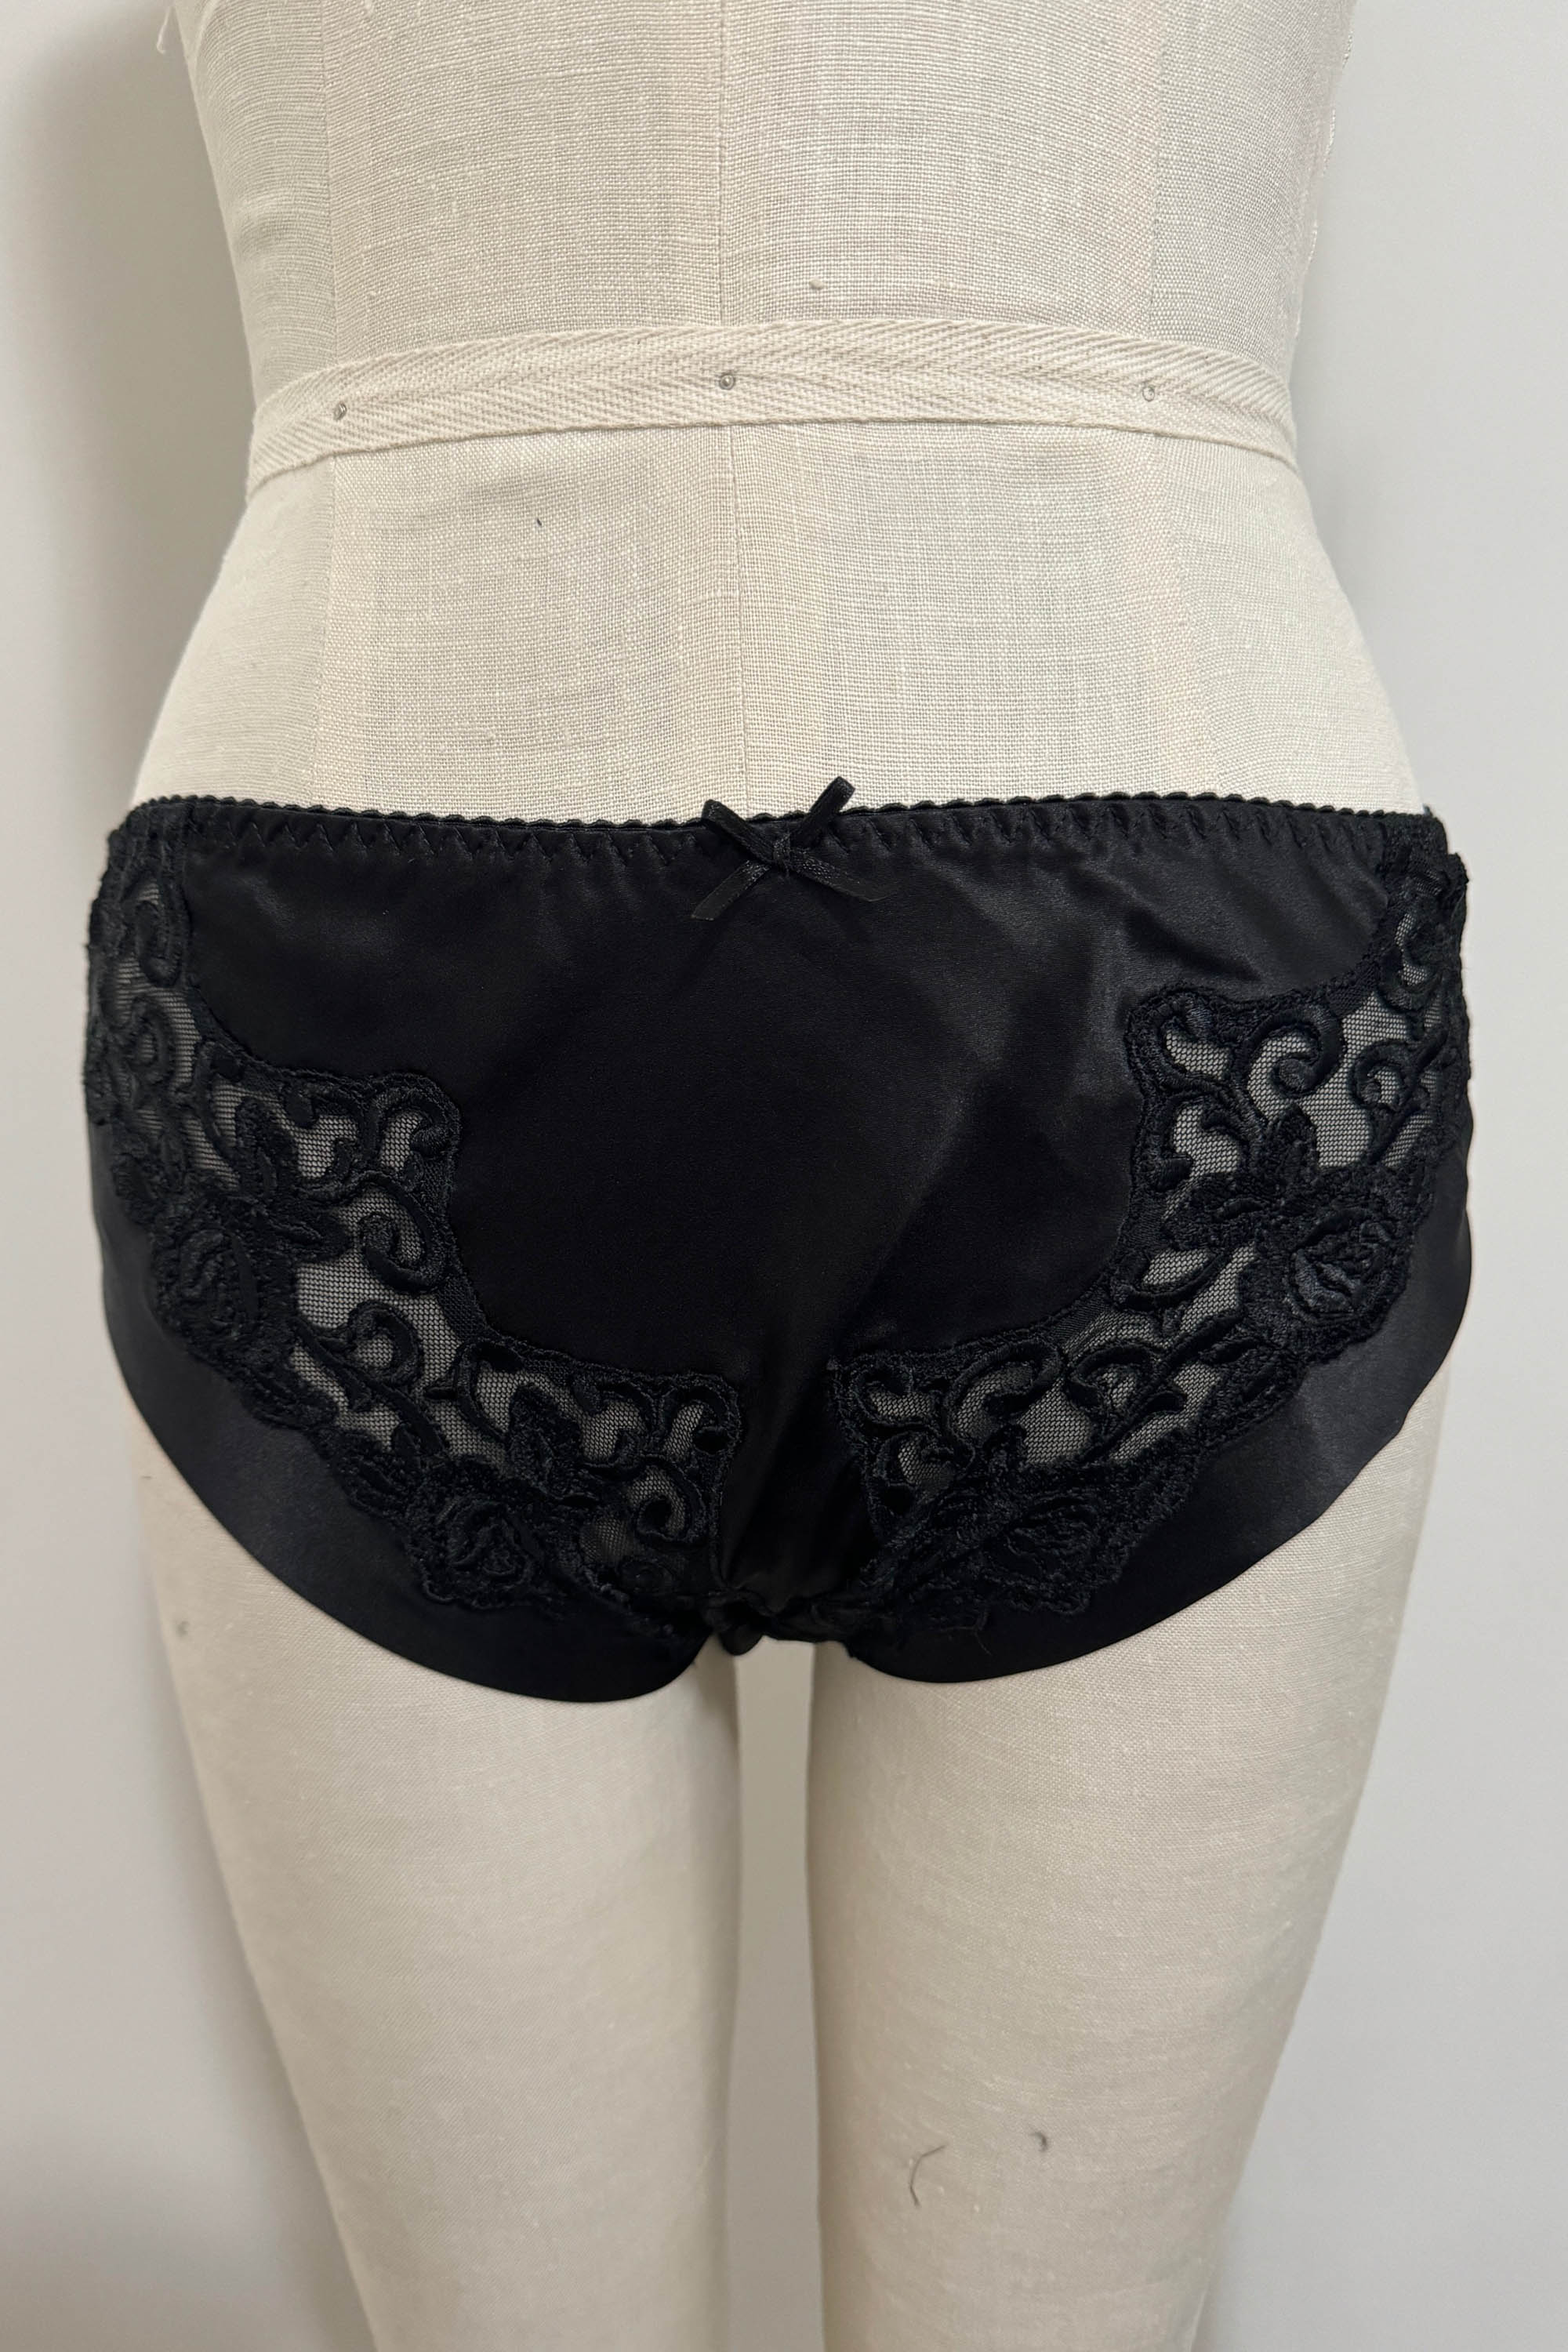 Women's Low Waist 19m/m Silk Charmeuse Panties with lace